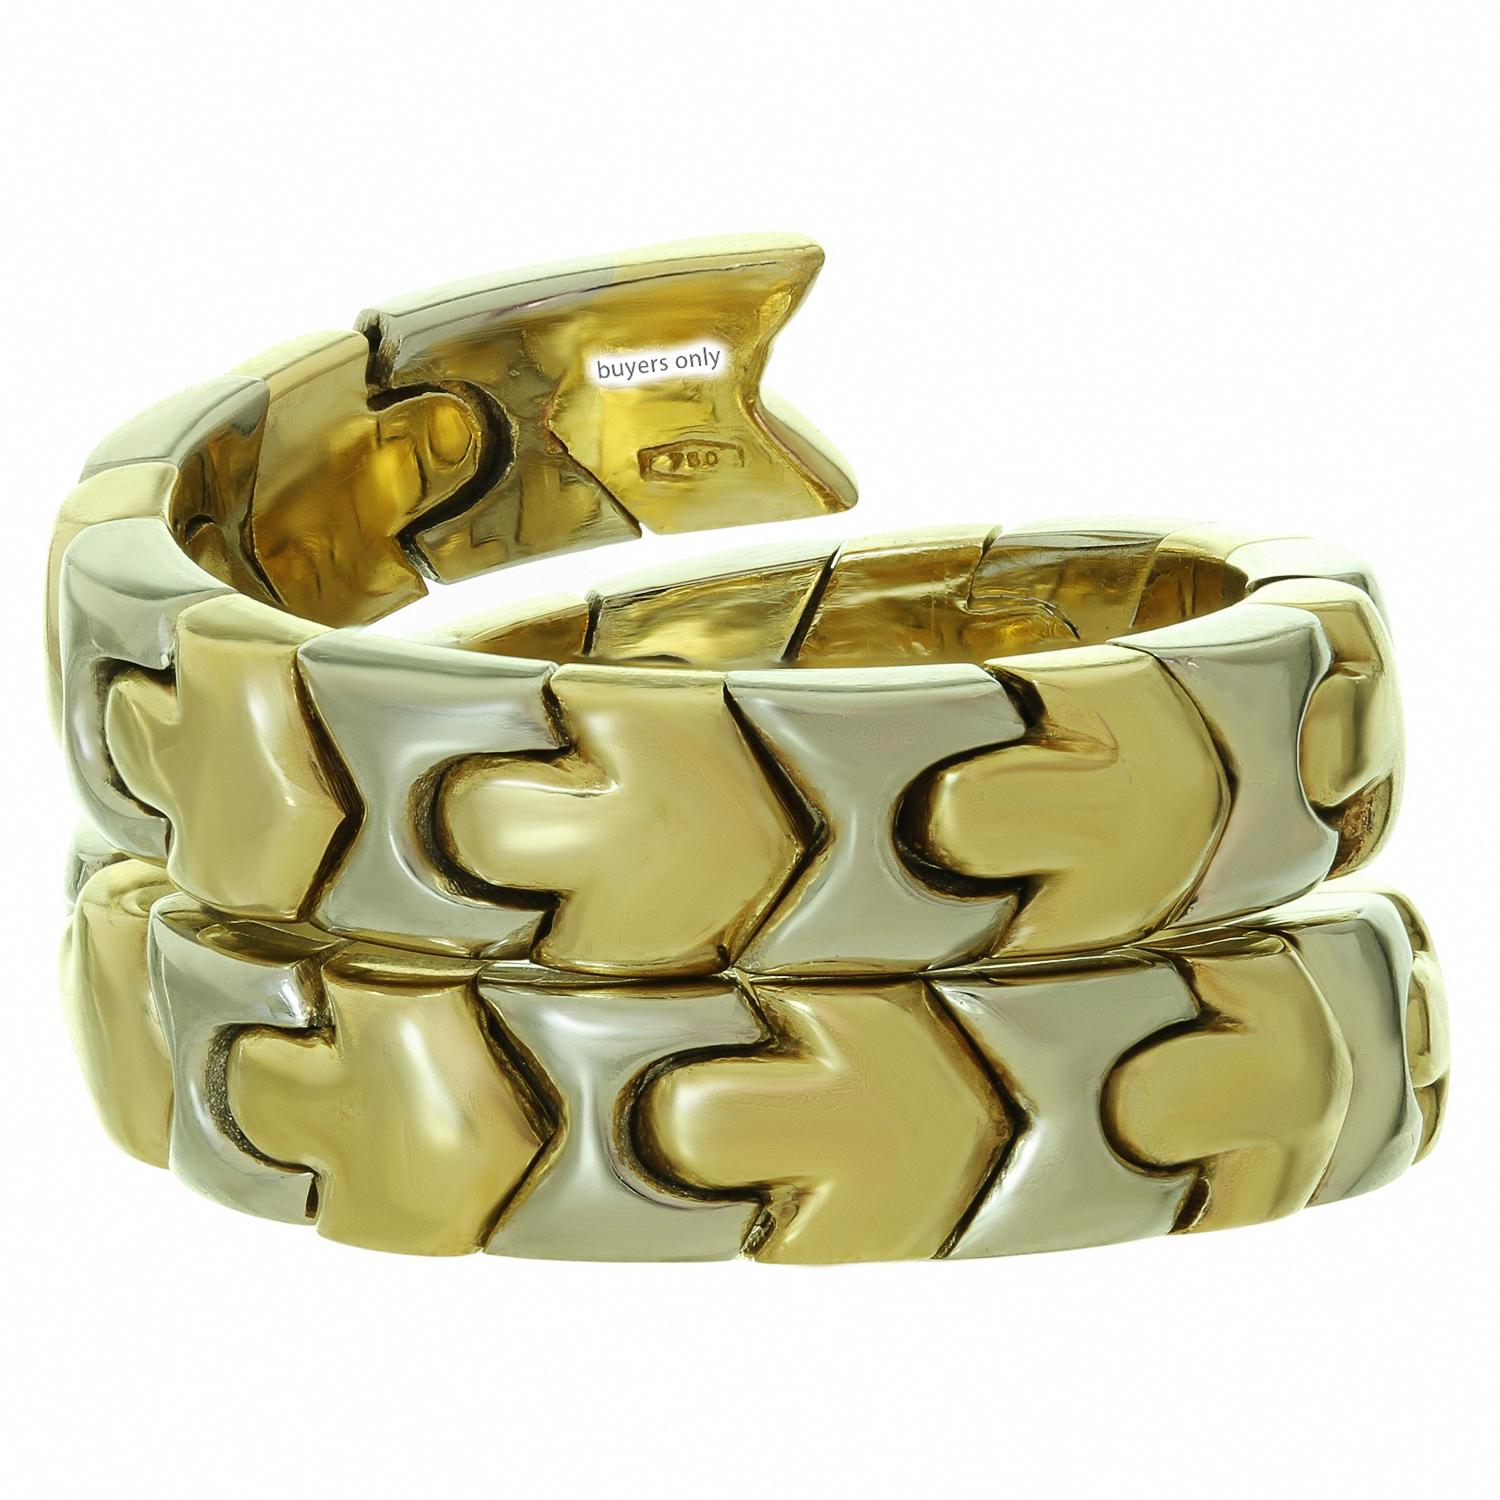 This gorgeous Bvlgari ring from the Alveare collection features a coiled design composed of geometric links crafted in 18k white and yellow gold. This ring has a slightly adjustable size. Made in Italy circa 1990s. Measurements: 0.59